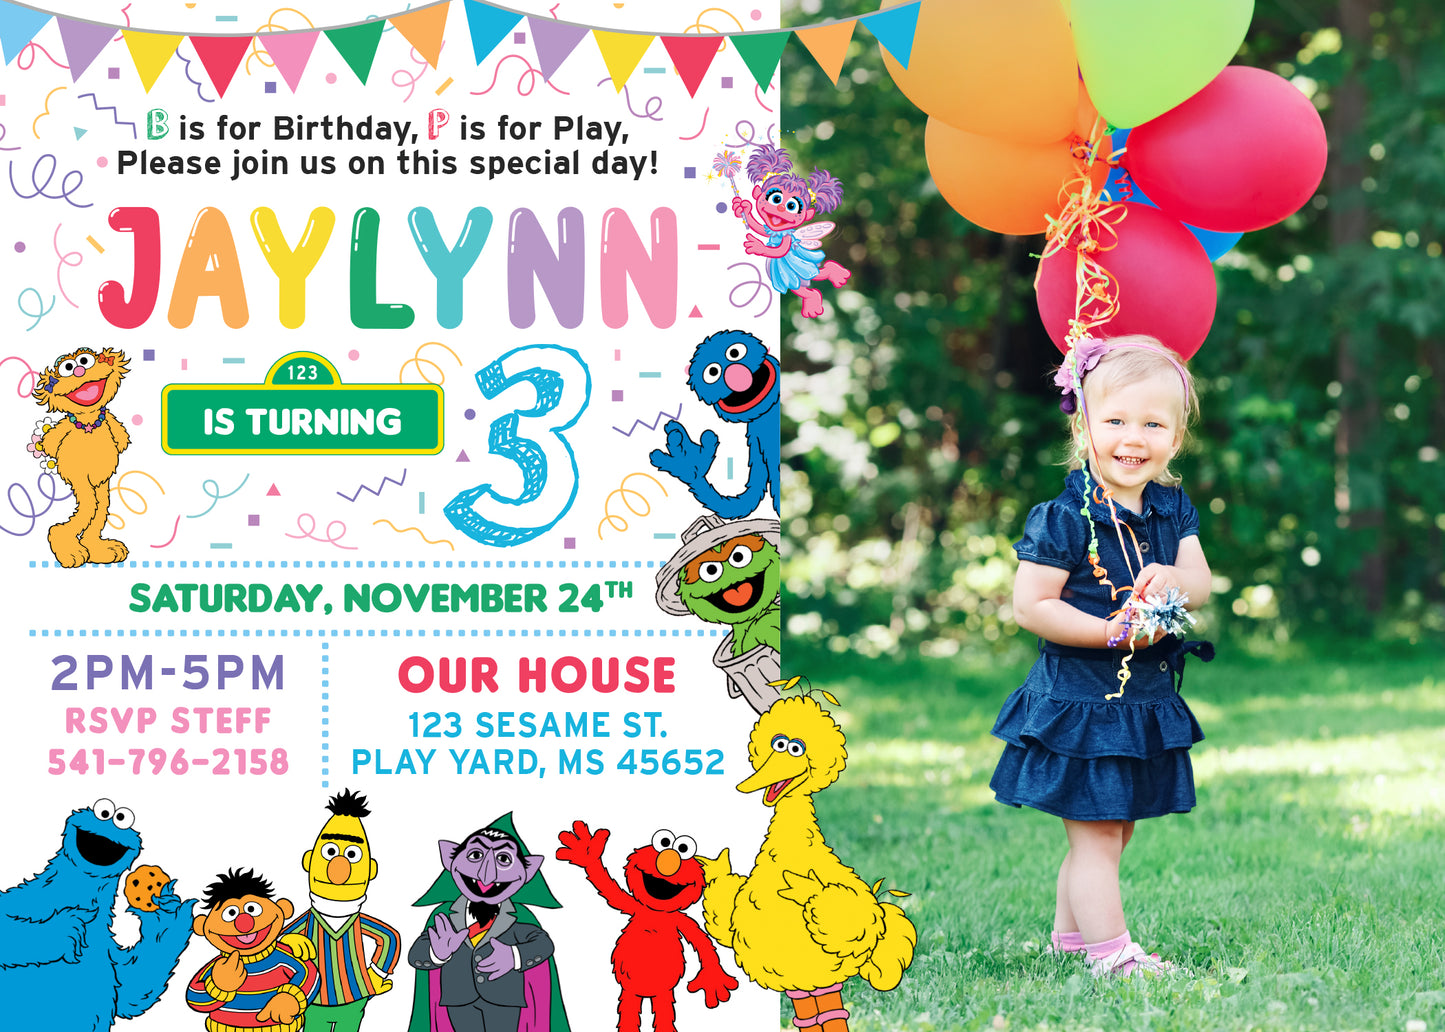 SESAME STREET Birthday Party Invitation with or without Photo! Big Bird and Elmo - Printed or Digital!